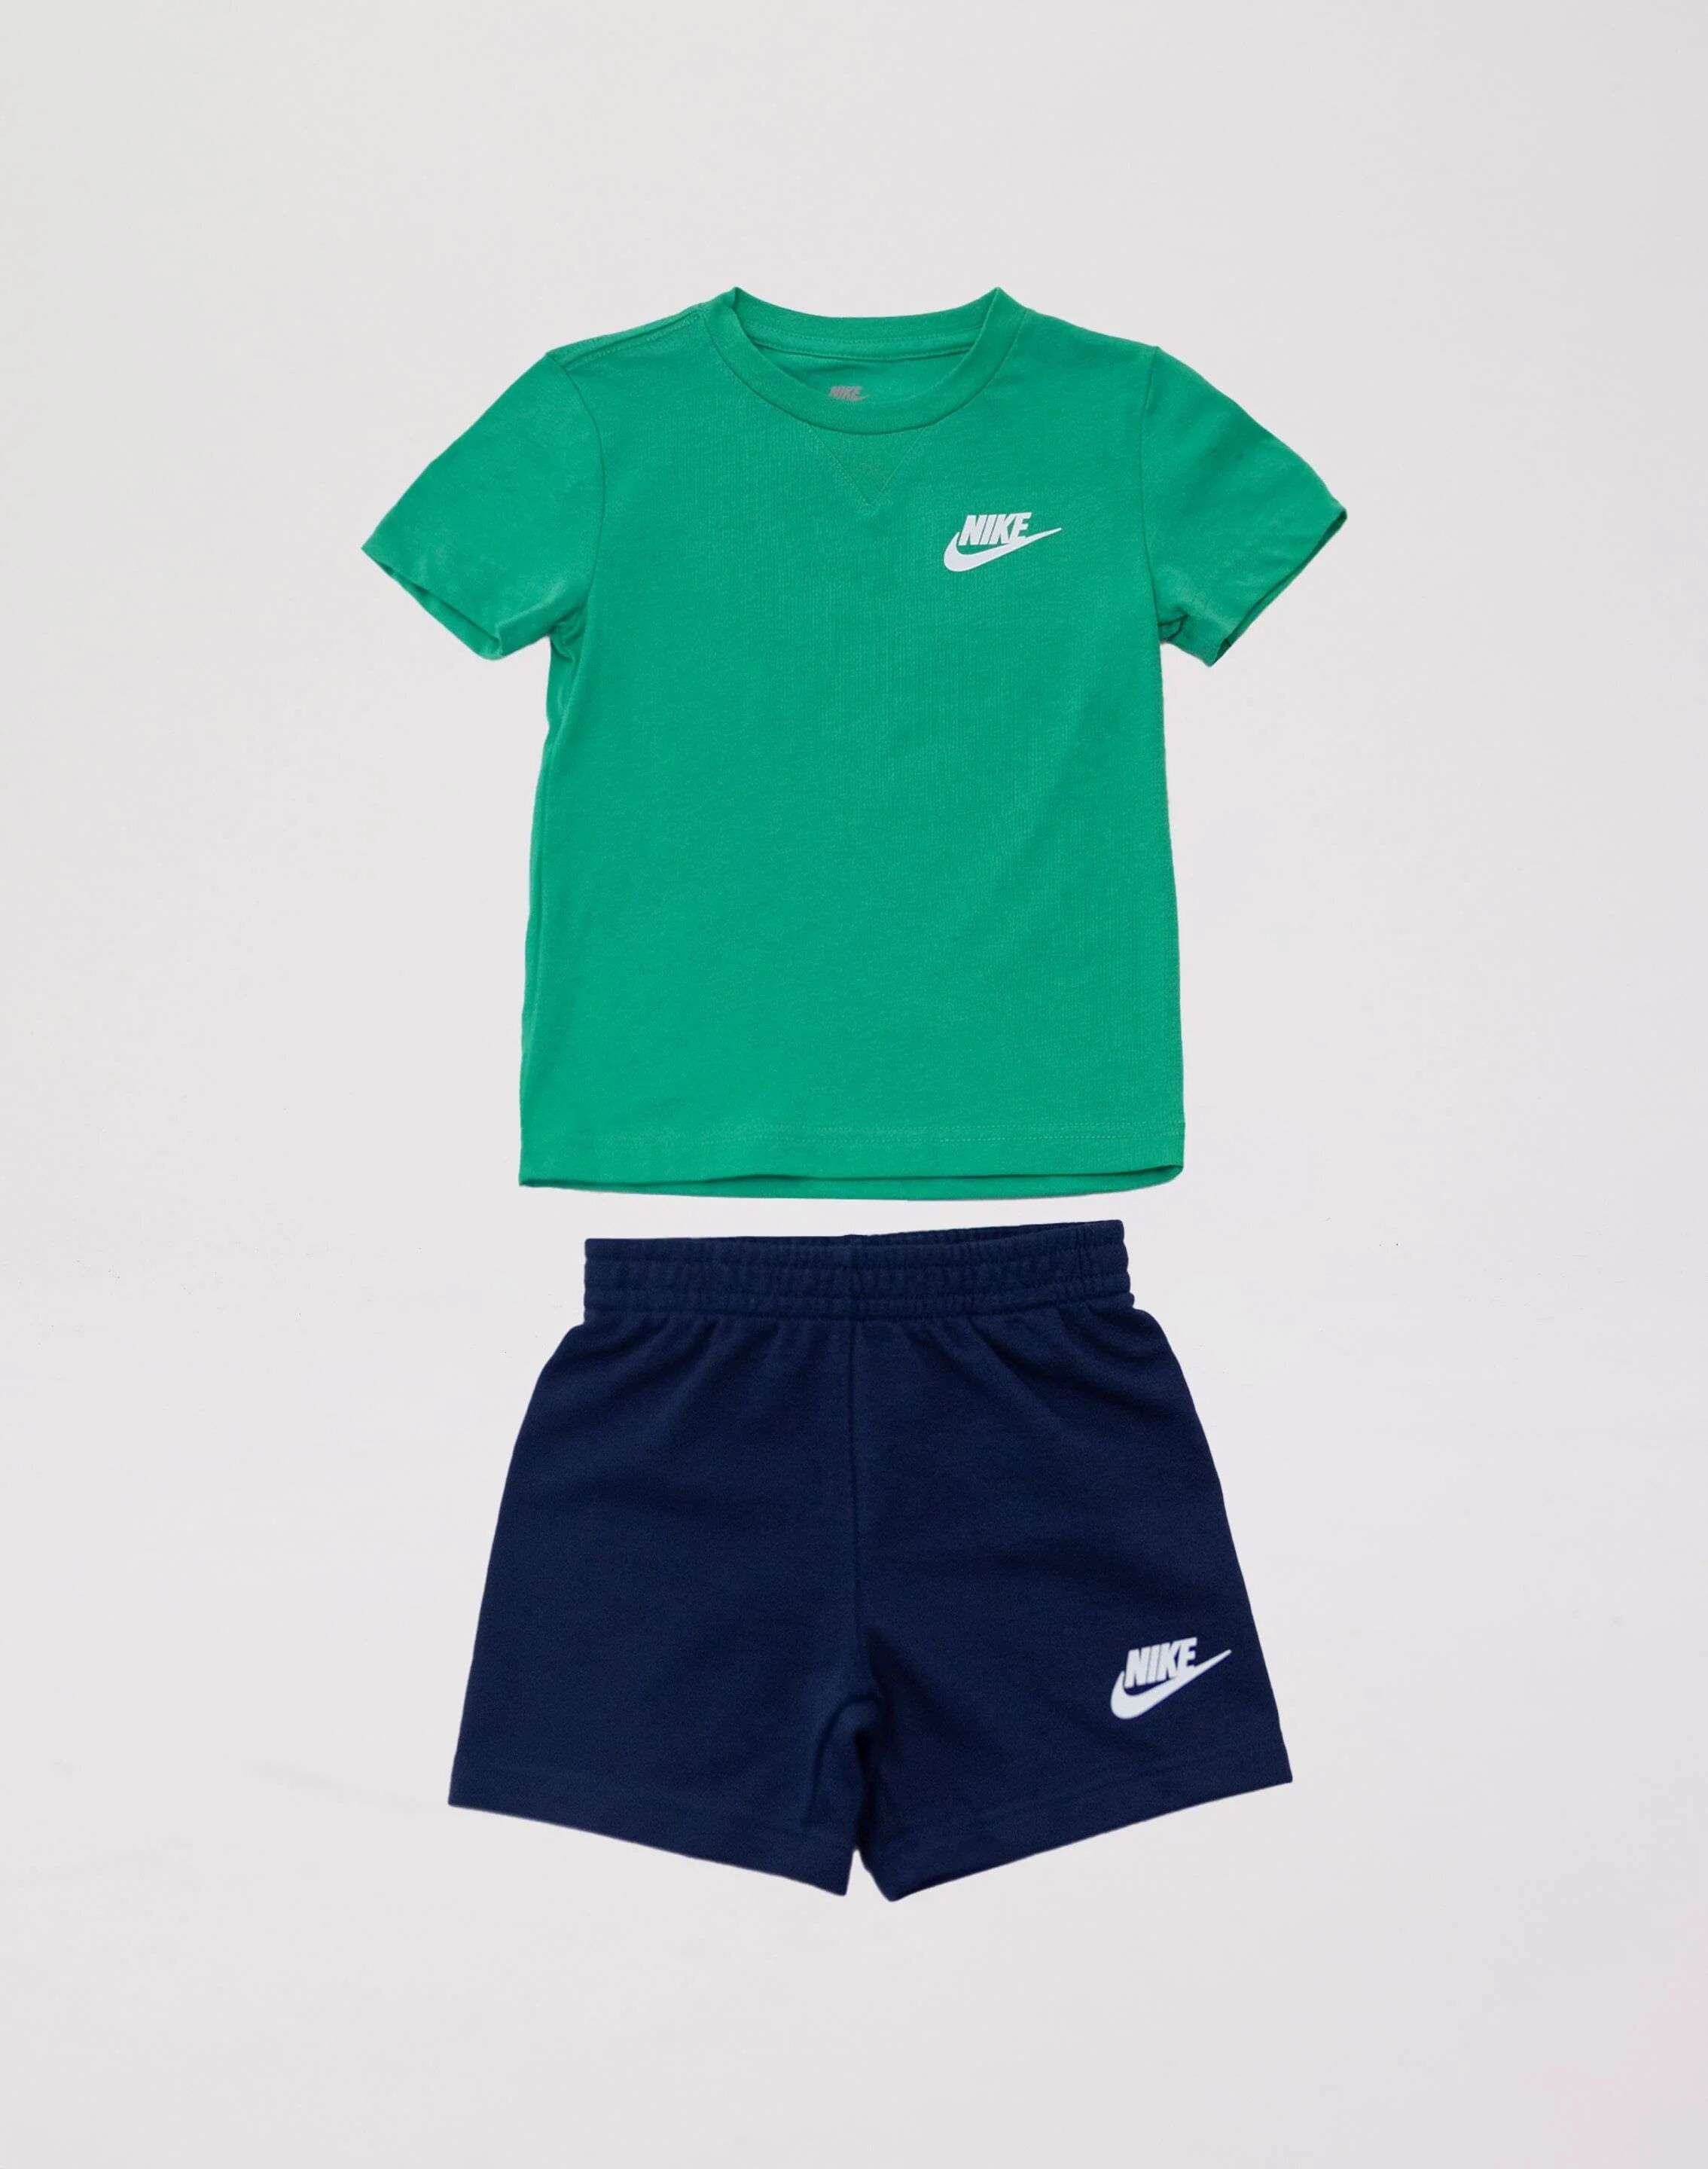 Nike French Terry Shorts Set Pre-School  - Green - Size: 6X/7